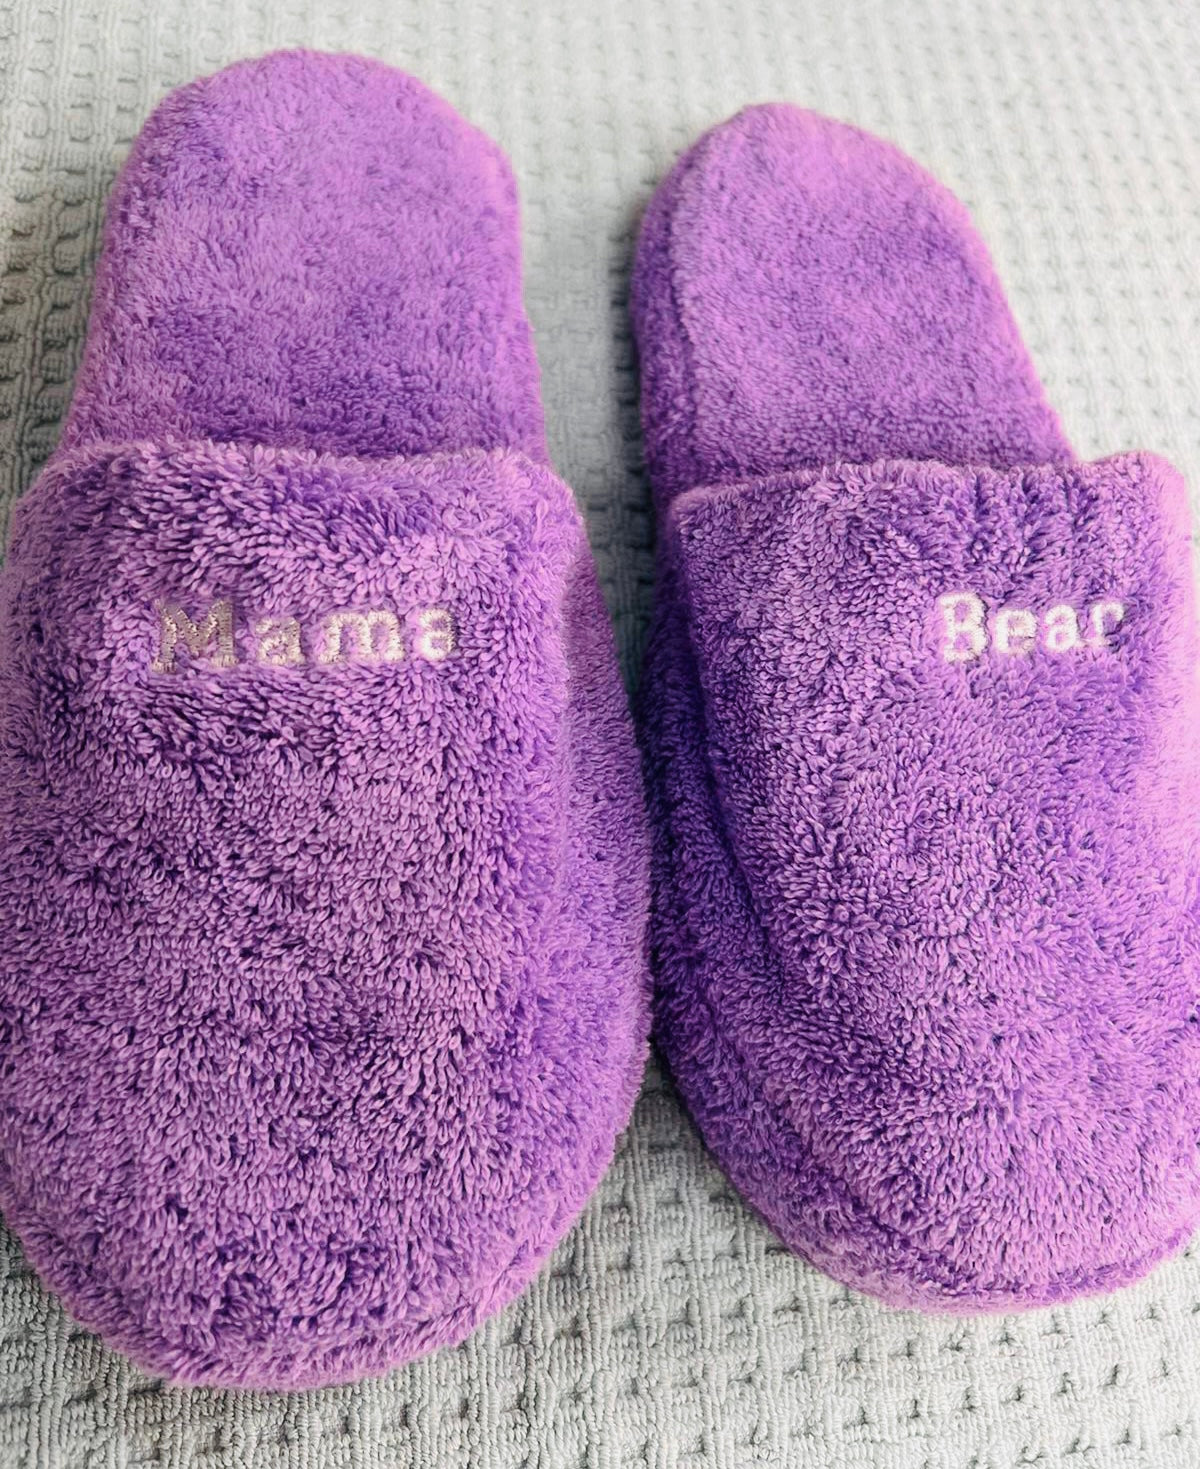 Terry Slippers, Soft & Plush Comfortable Lounging, Made in Turkey - www.towel.com